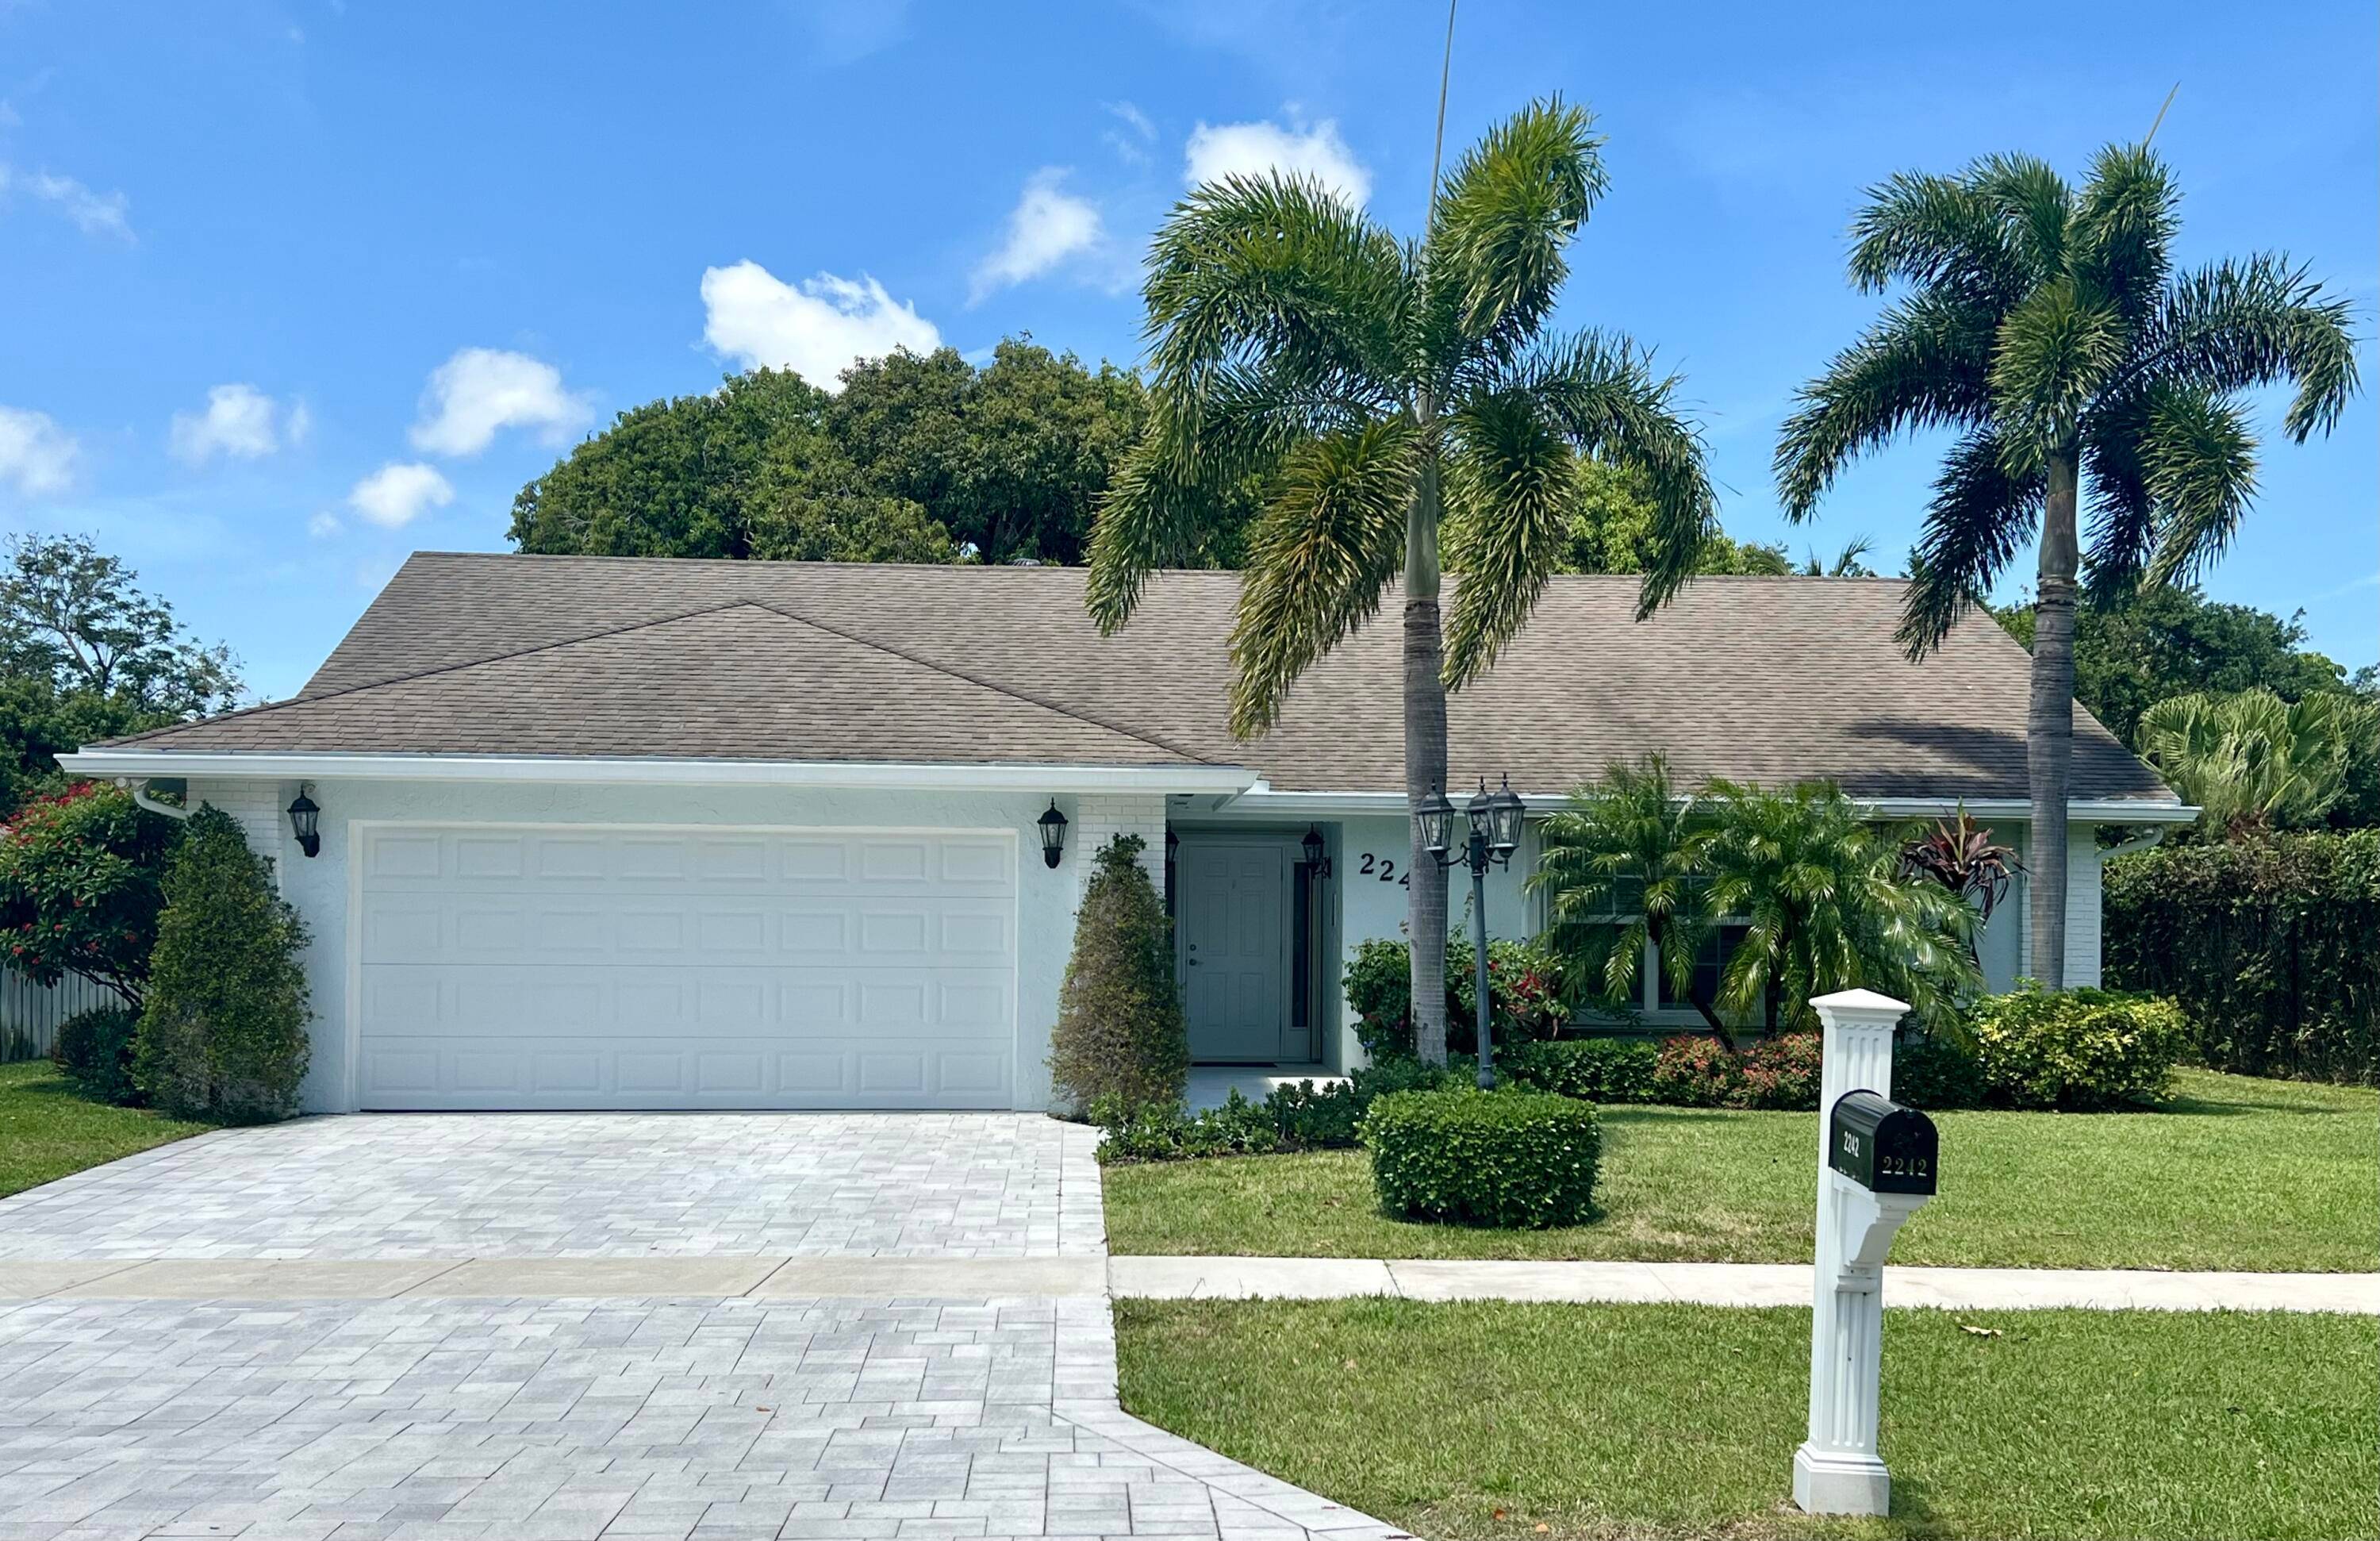 This beautiful 3 bedrooms 2 bathrooms home on Gabriel Lane boast a wide open and spacious floor plan which is perfect for in door entertainment.